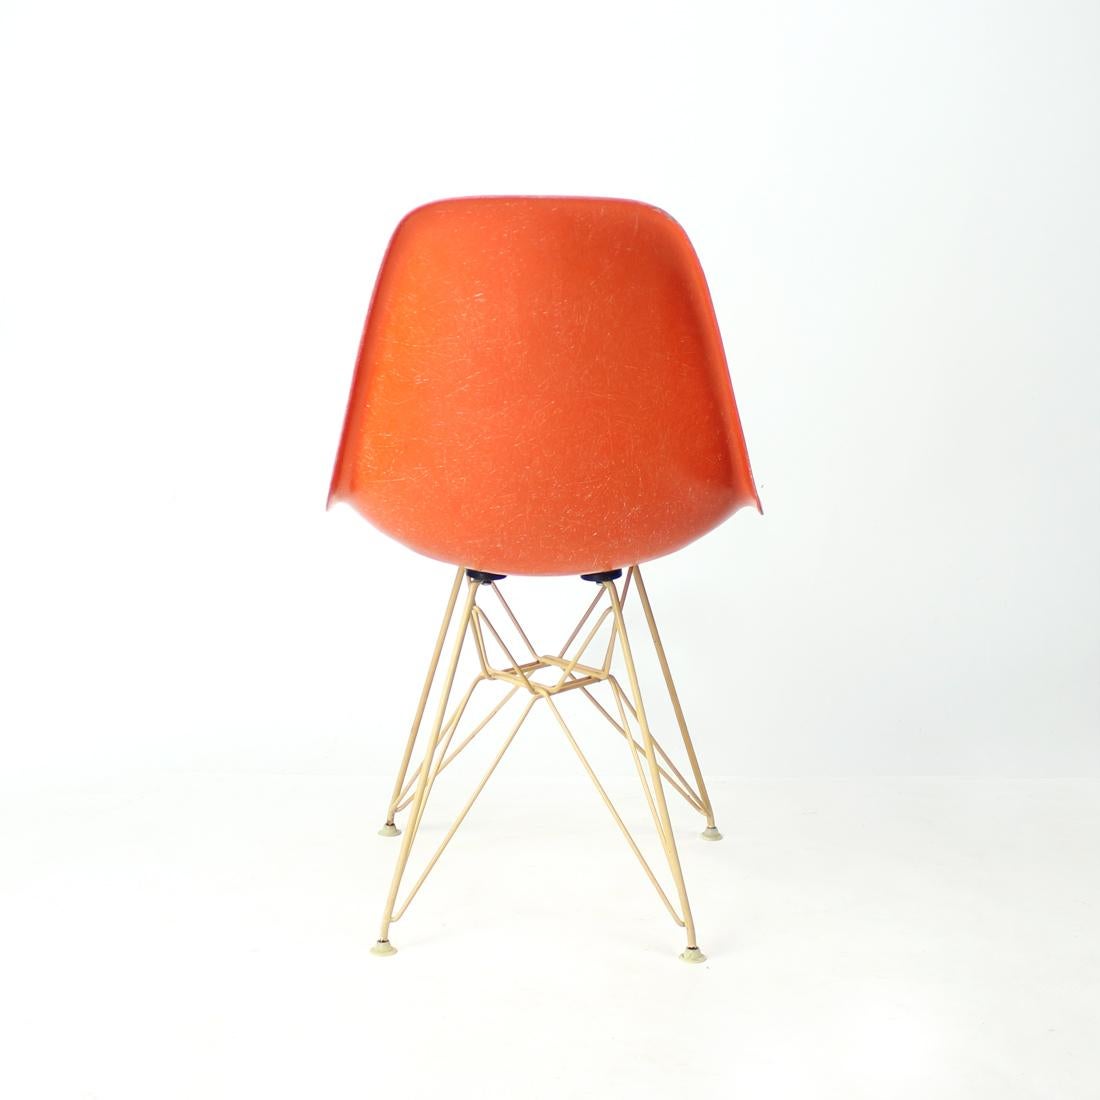 Metal Orange Eiffel Shell Chair By Charles And Ray Eames For Herman Miller, 1960s For Sale